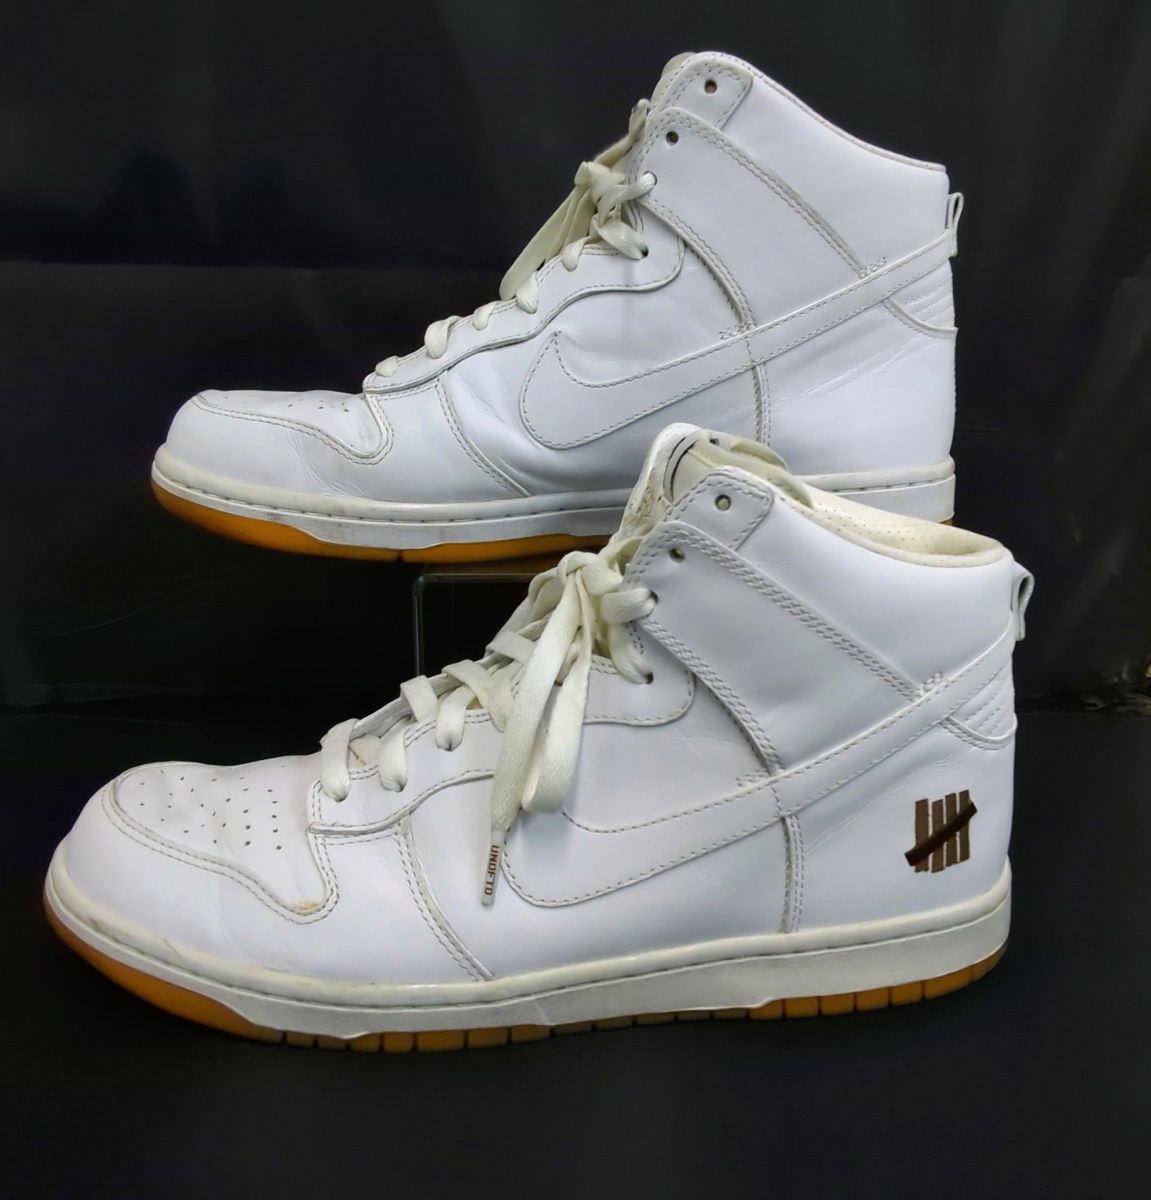 NIKE 598472-110 SIZE 28cm DUNK PRM HI UNDFTD SP "UNDEFEATED" white/white ナイキ ダンク ハイ ◆3115/登呂店_画像7